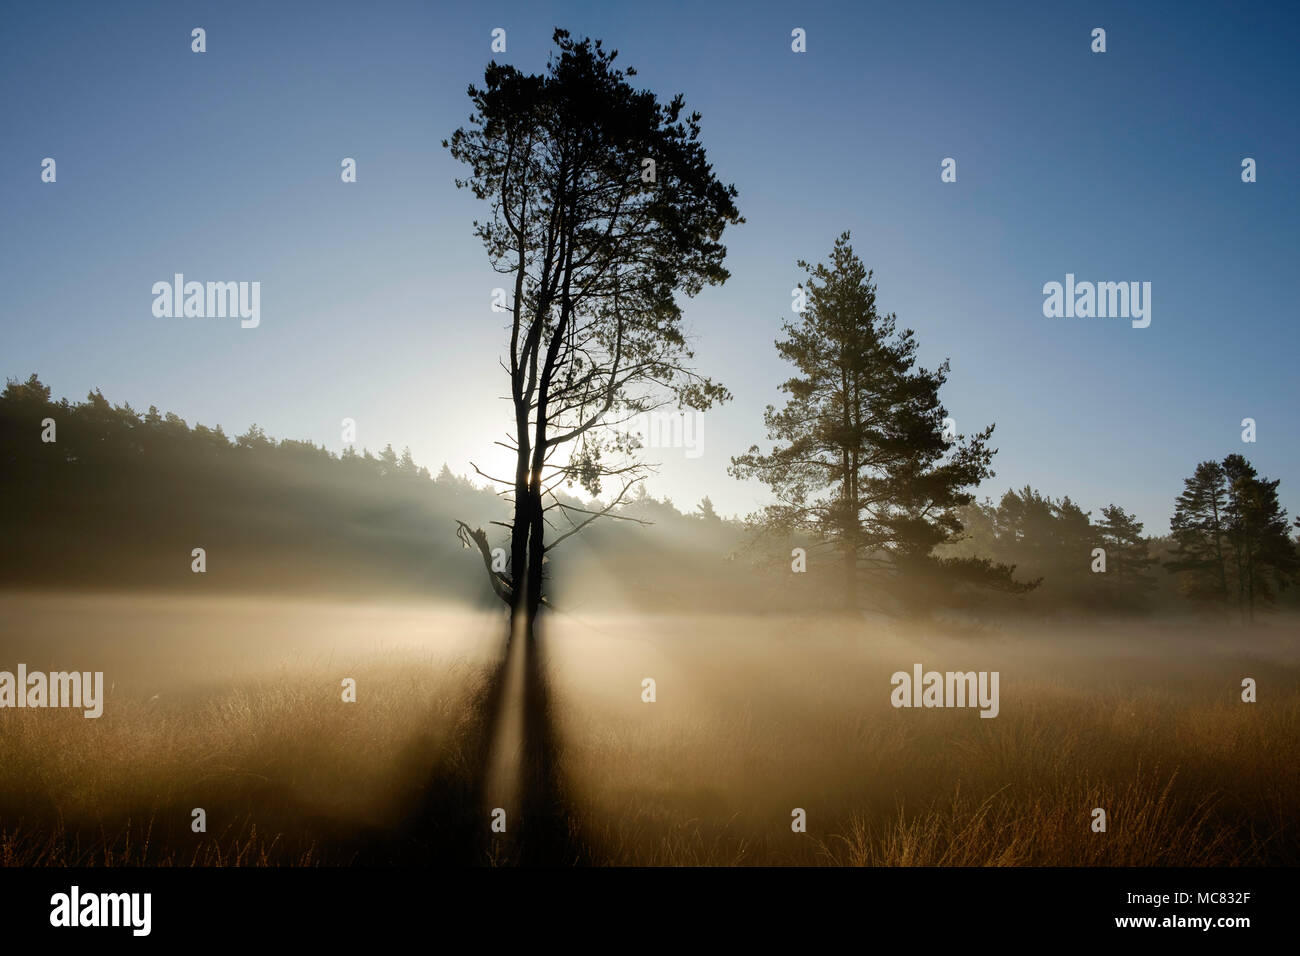 Backlit Pine tree in a sea of mist on Chobham common Stock Photo